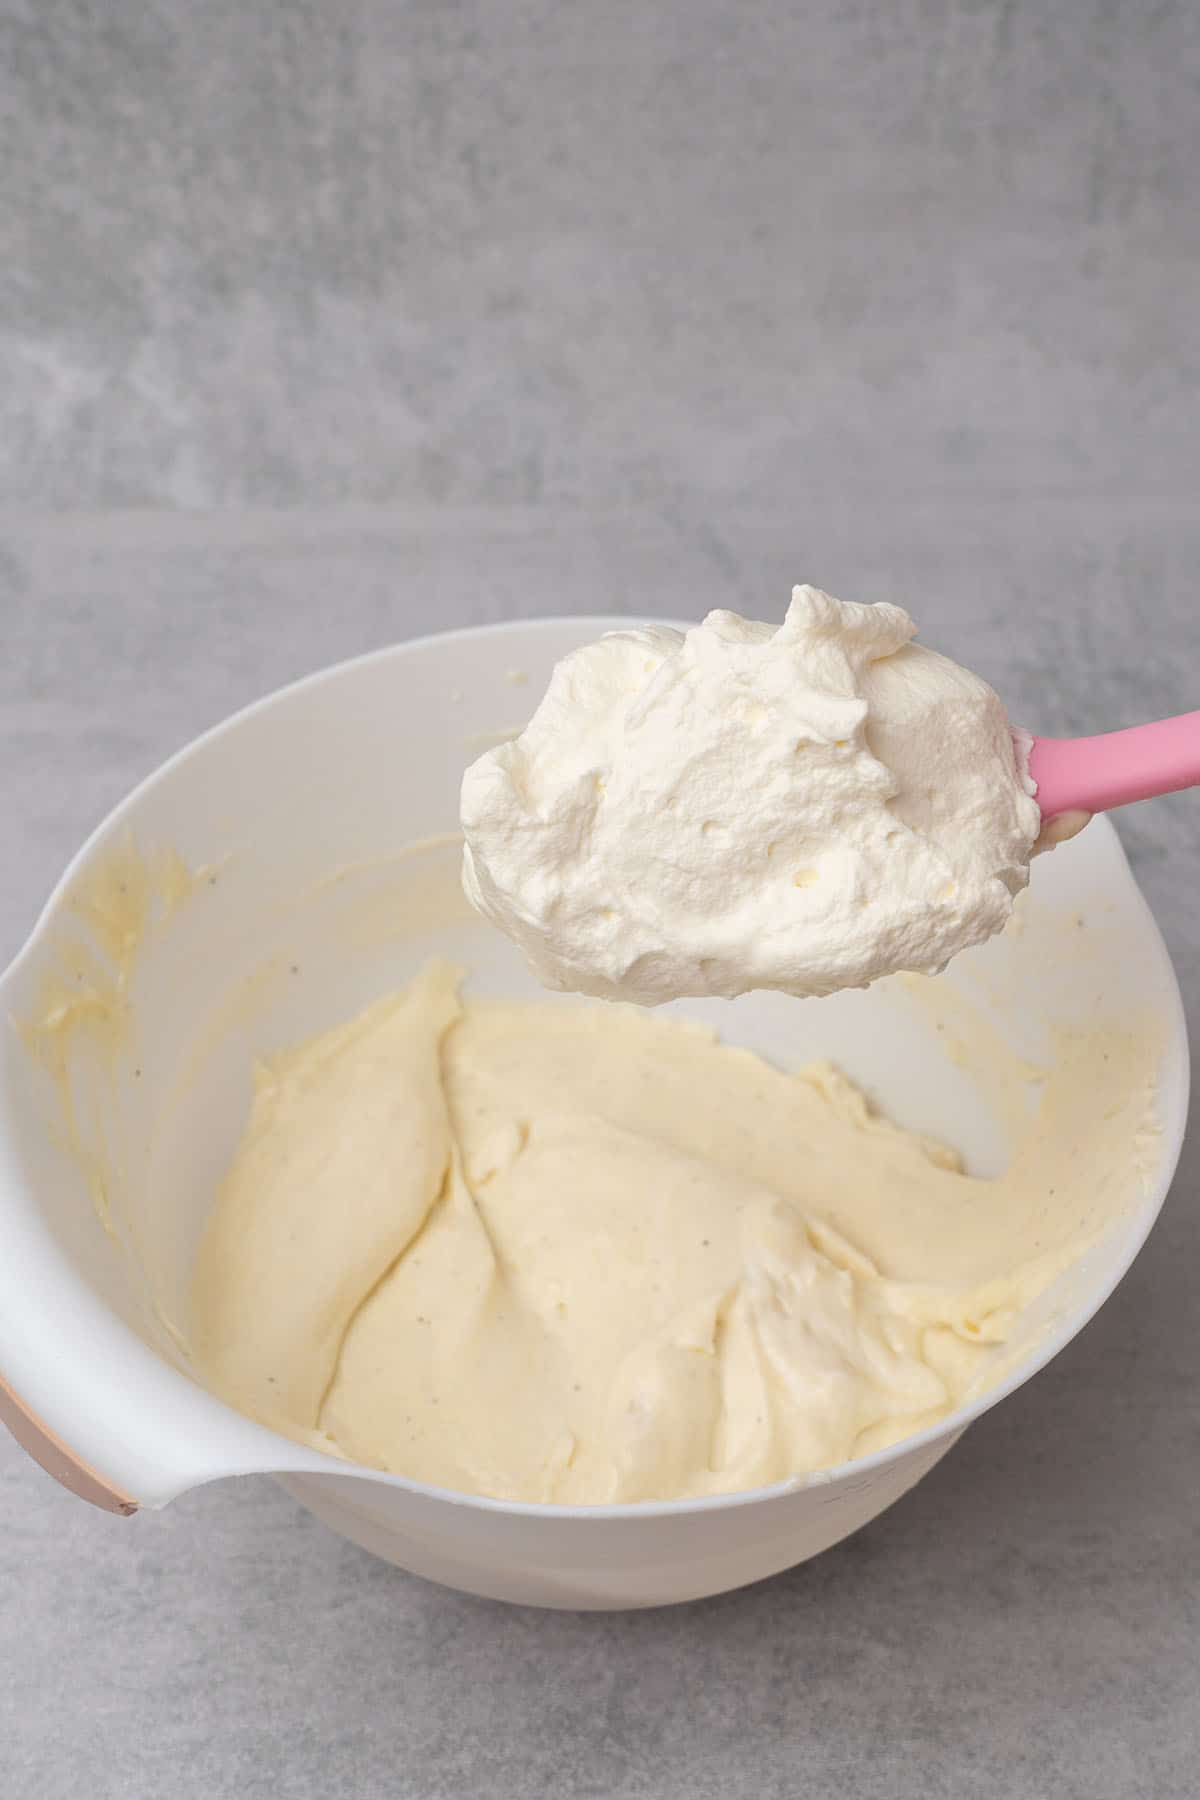 Mixing the pastry cream and whipped cream to make diplomat cream.